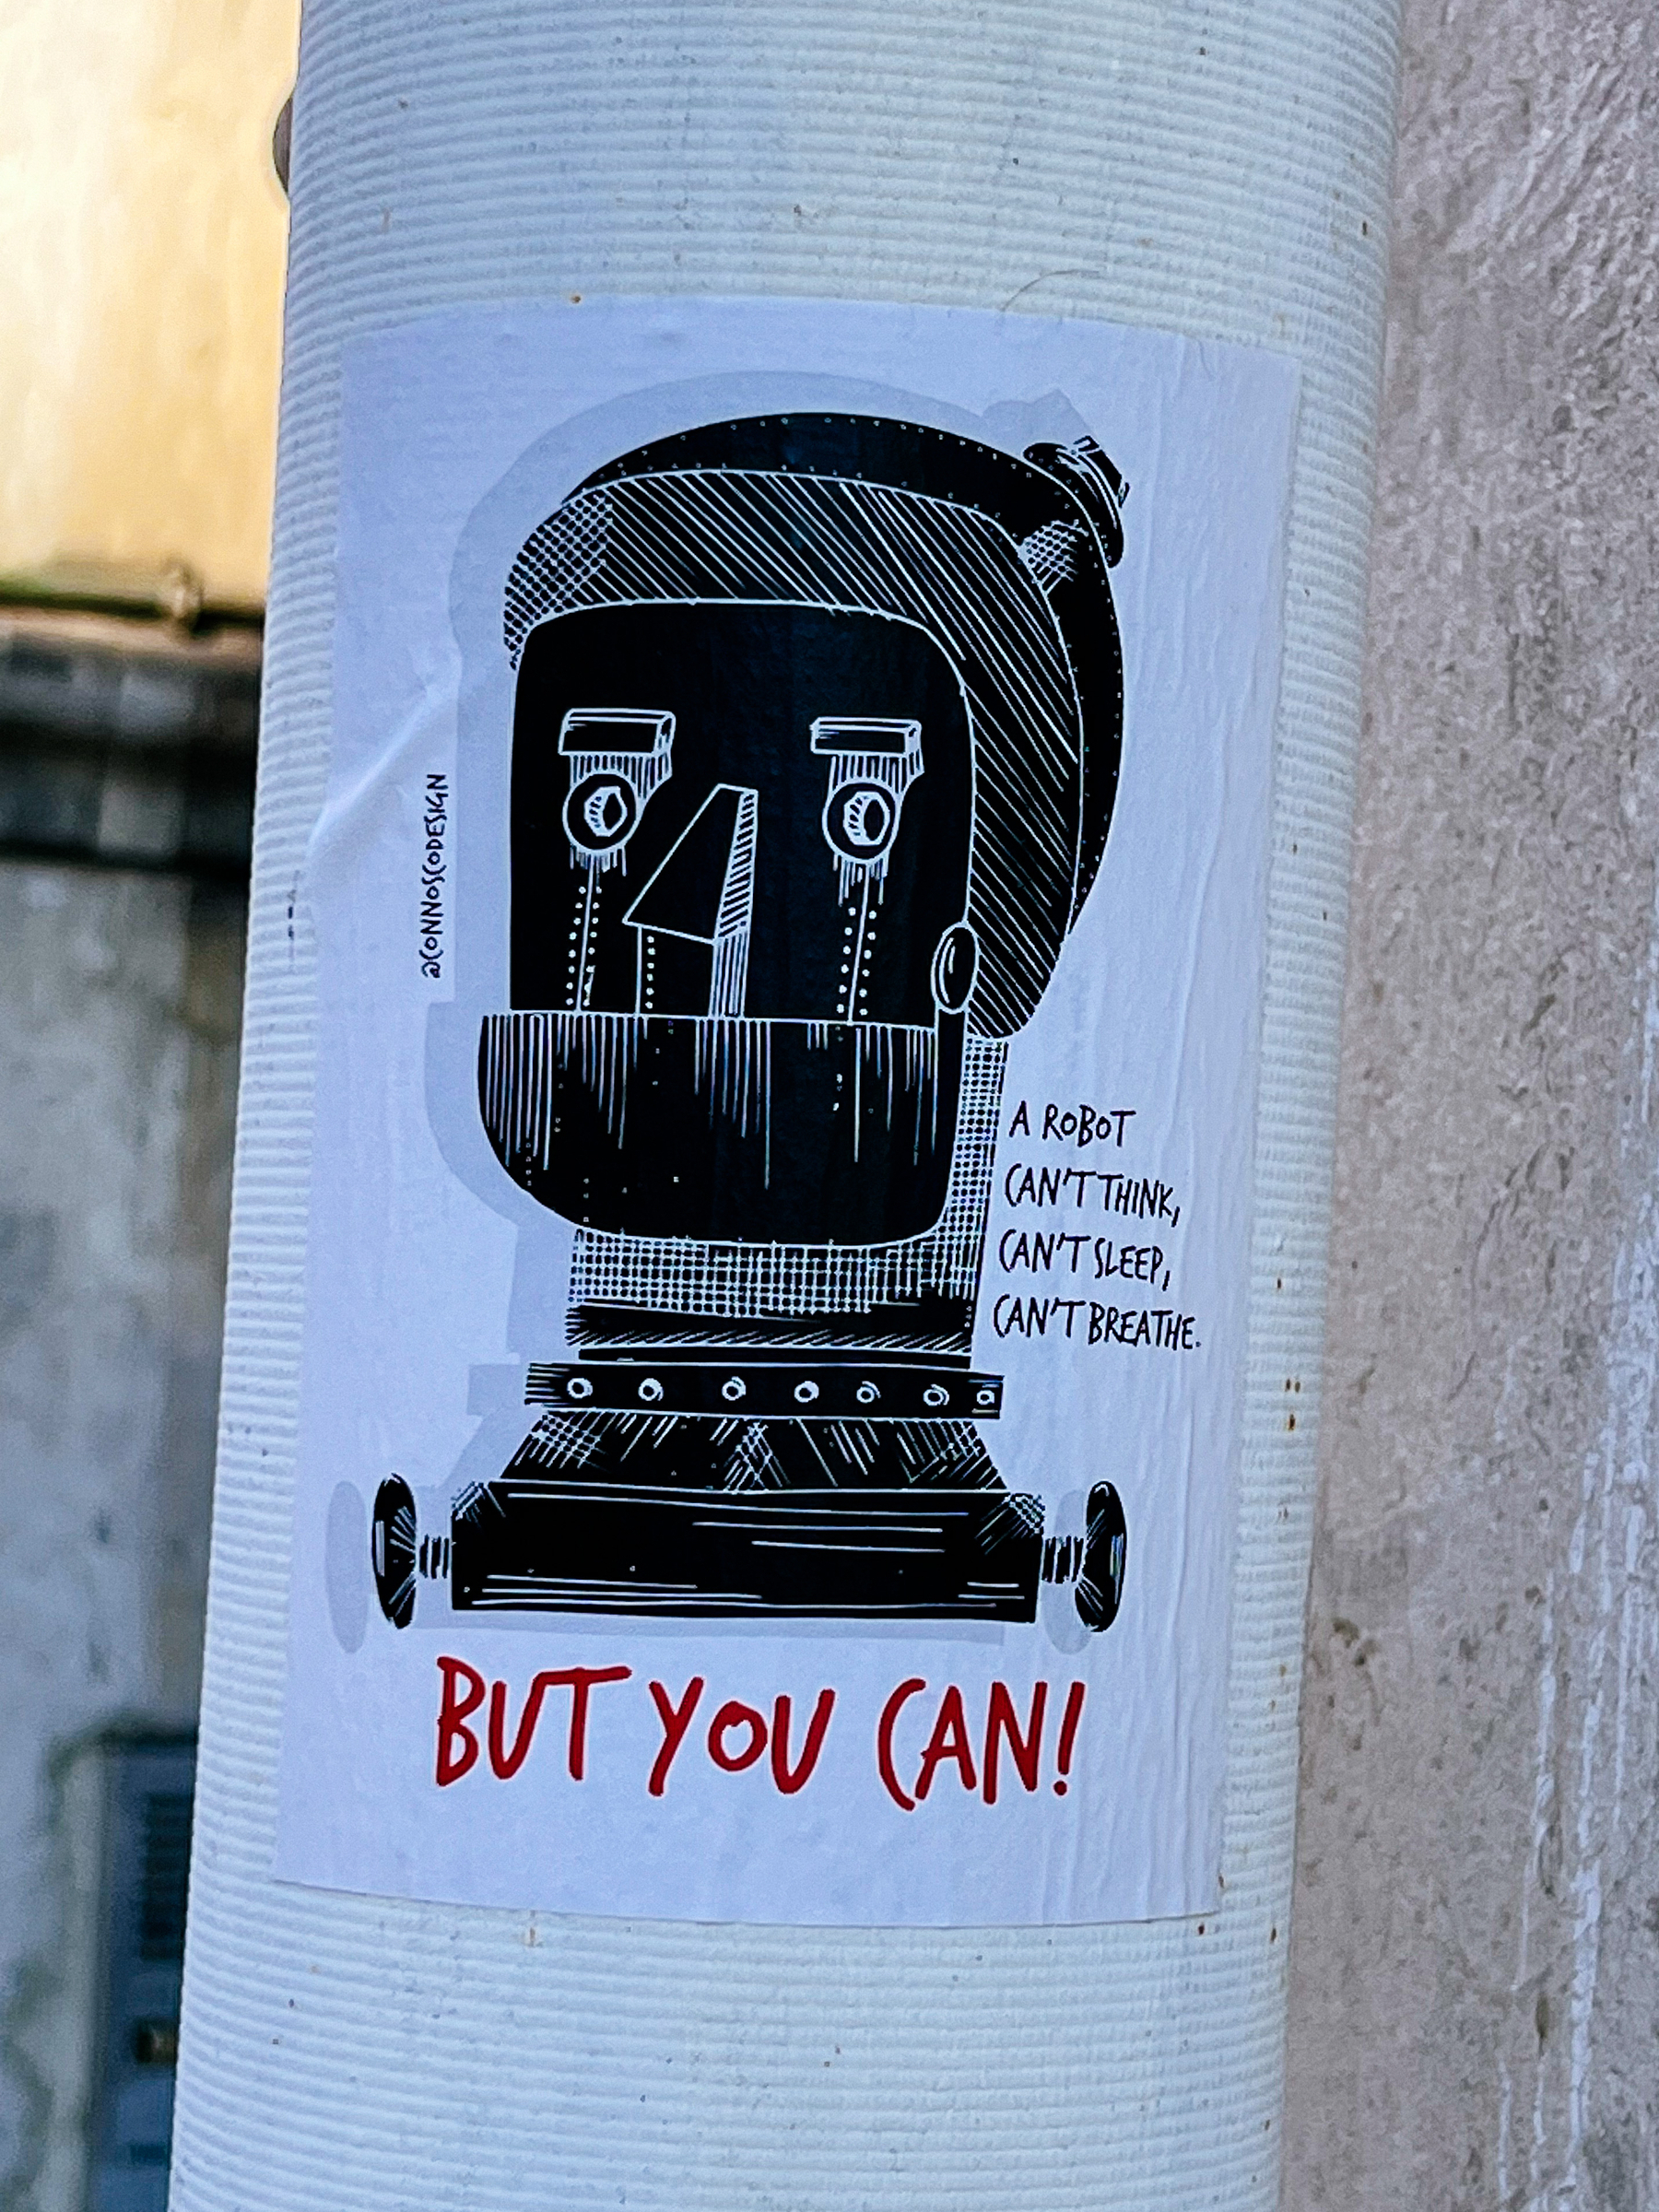 Sticker of a drawing of a robot’s head, with the words “A robot can’t think, can’t sleep, can’t breathe. But you can” next to it. 